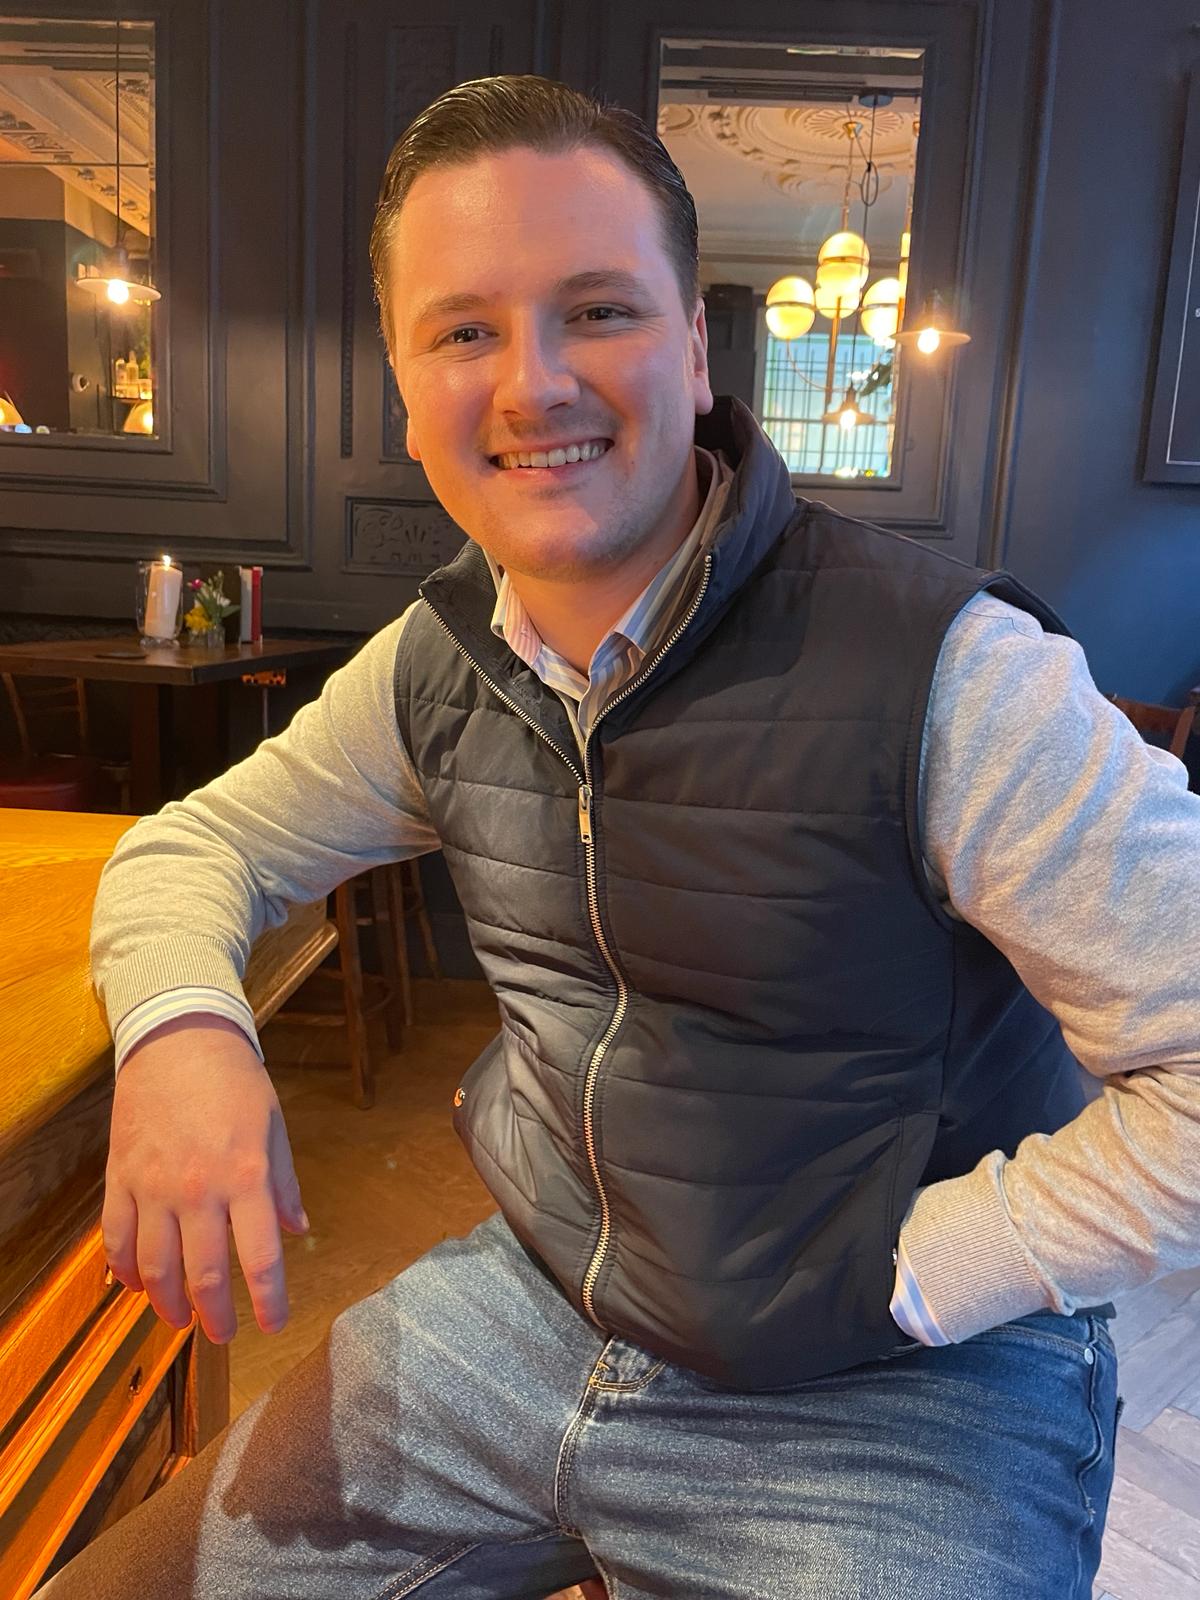 A young man sitting in a bar/restaurant smiling